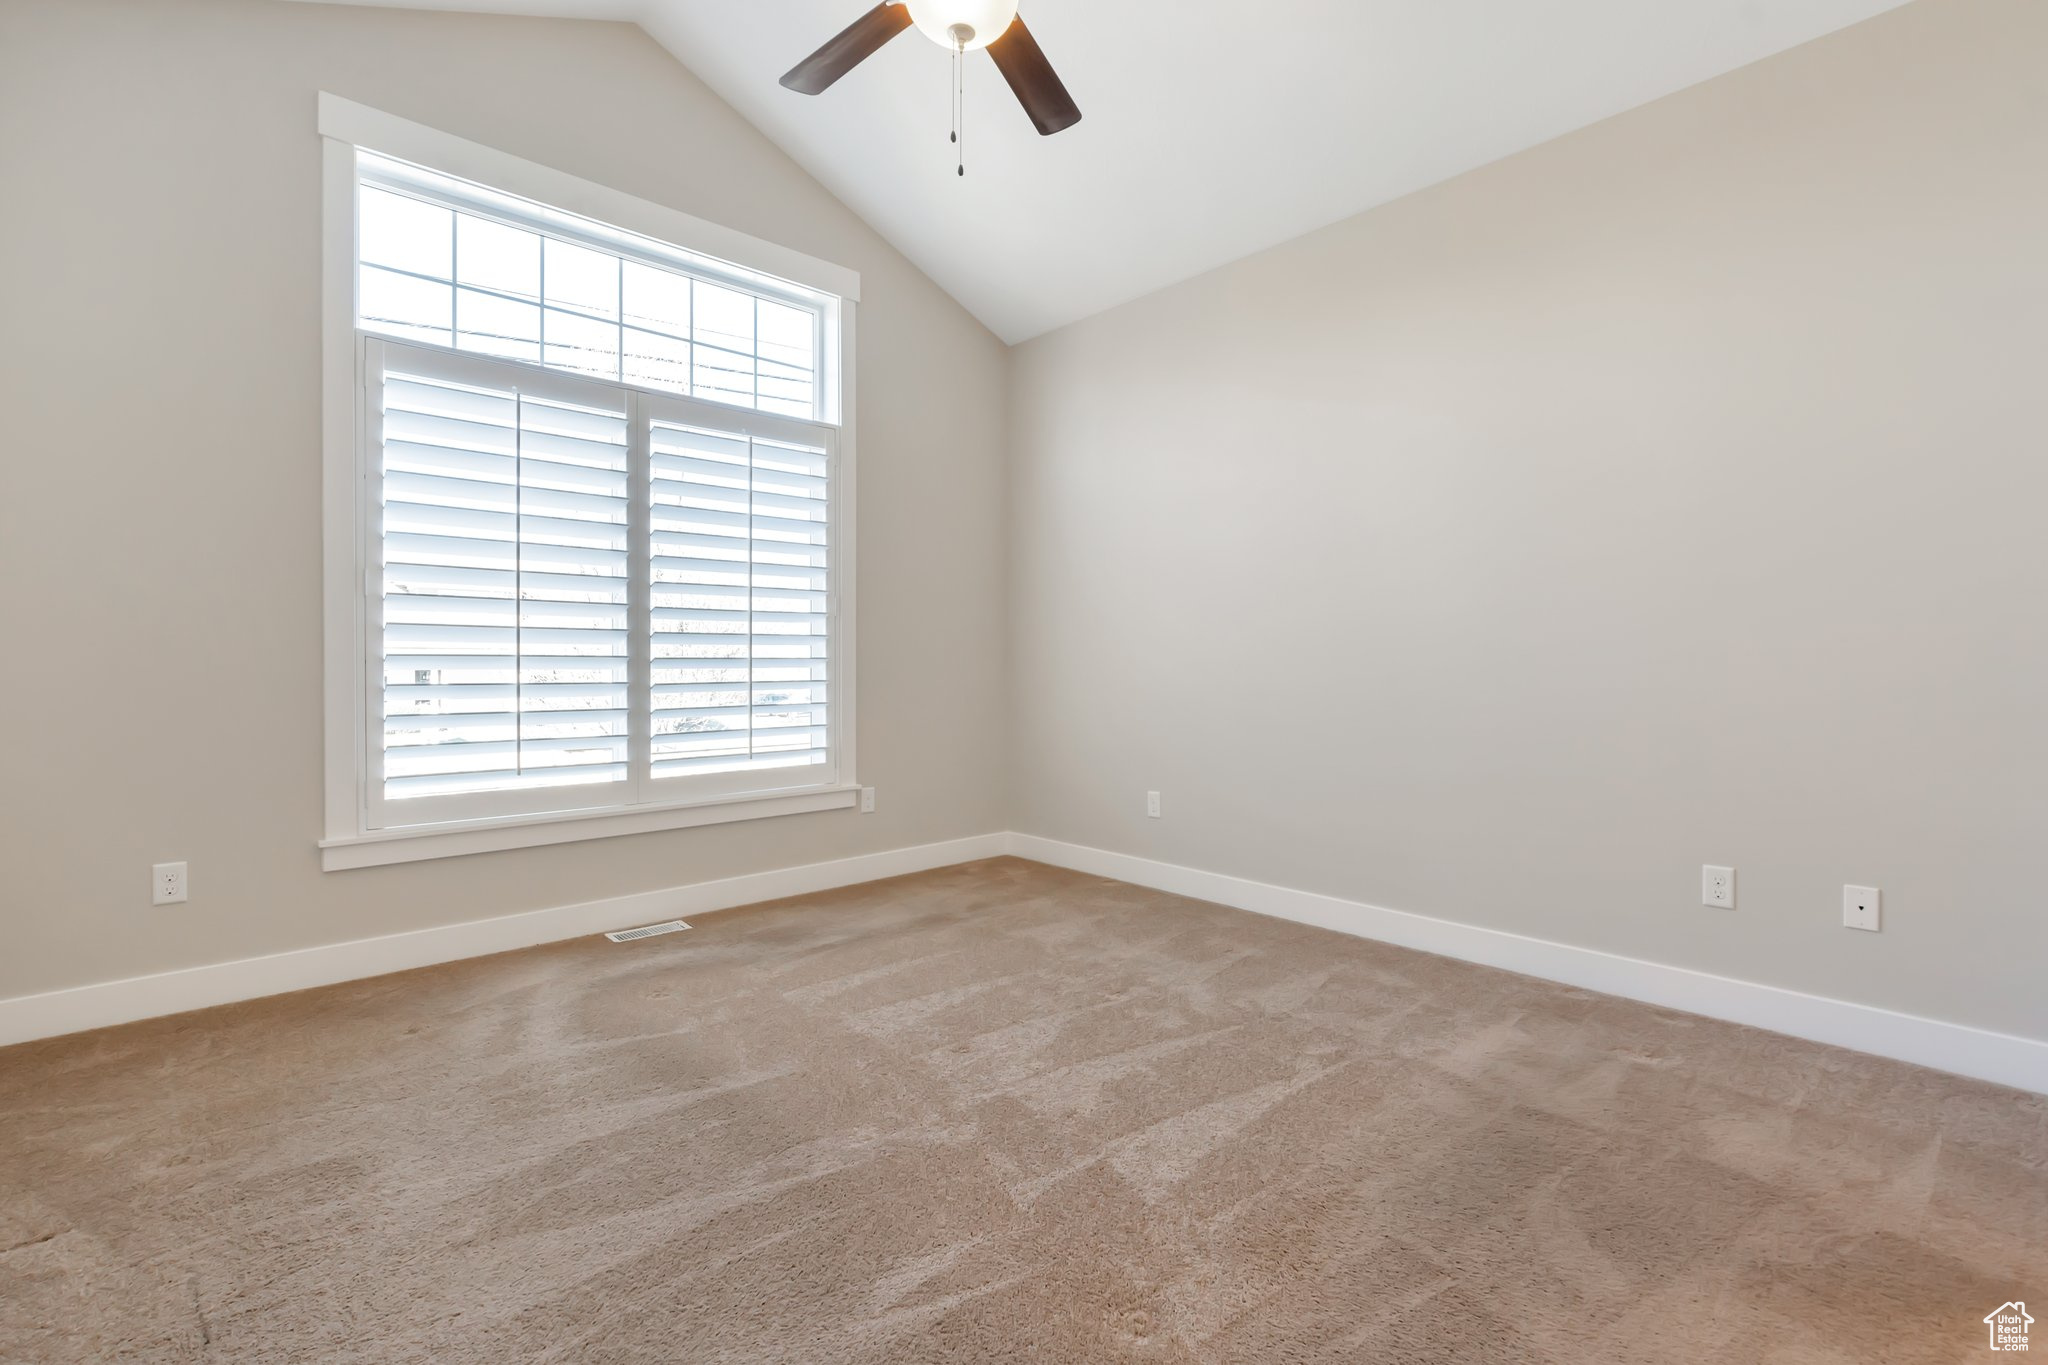 Empty room featuring vaulted ceiling, light colored carpet, a wealth of natural light, and ceiling fan